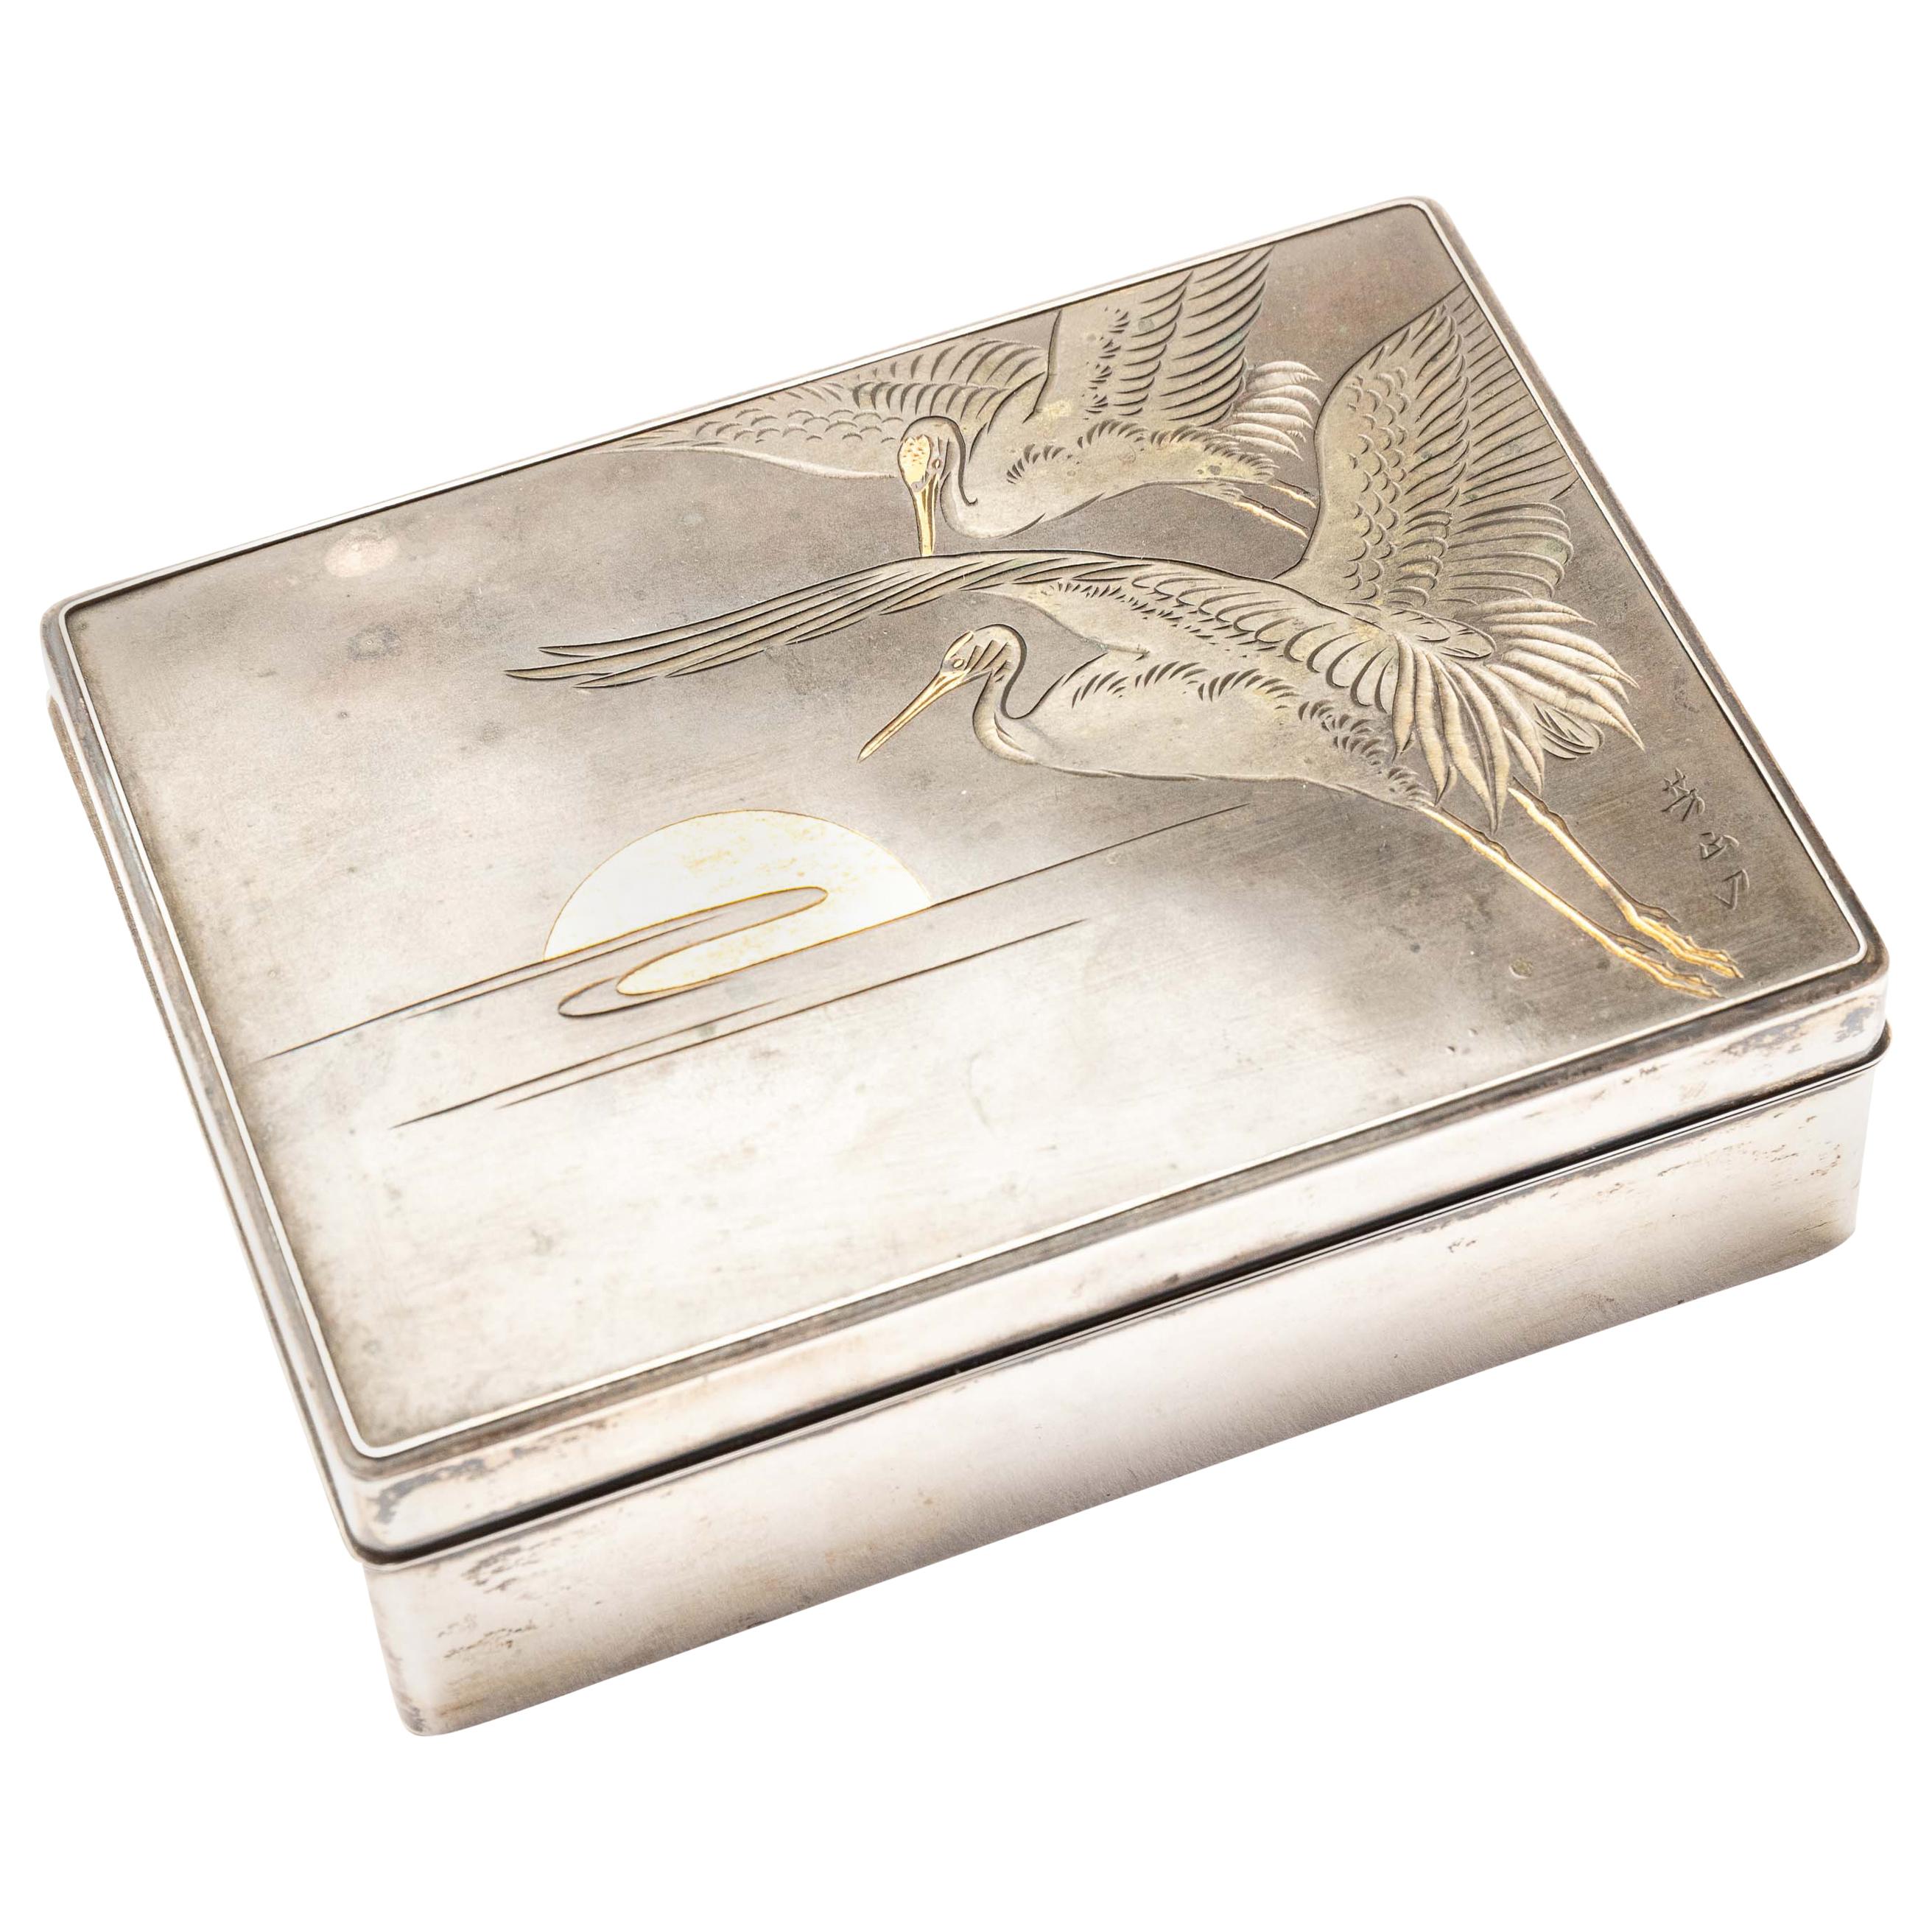 Silver Cigarette Box with Incised Cranes from Japan